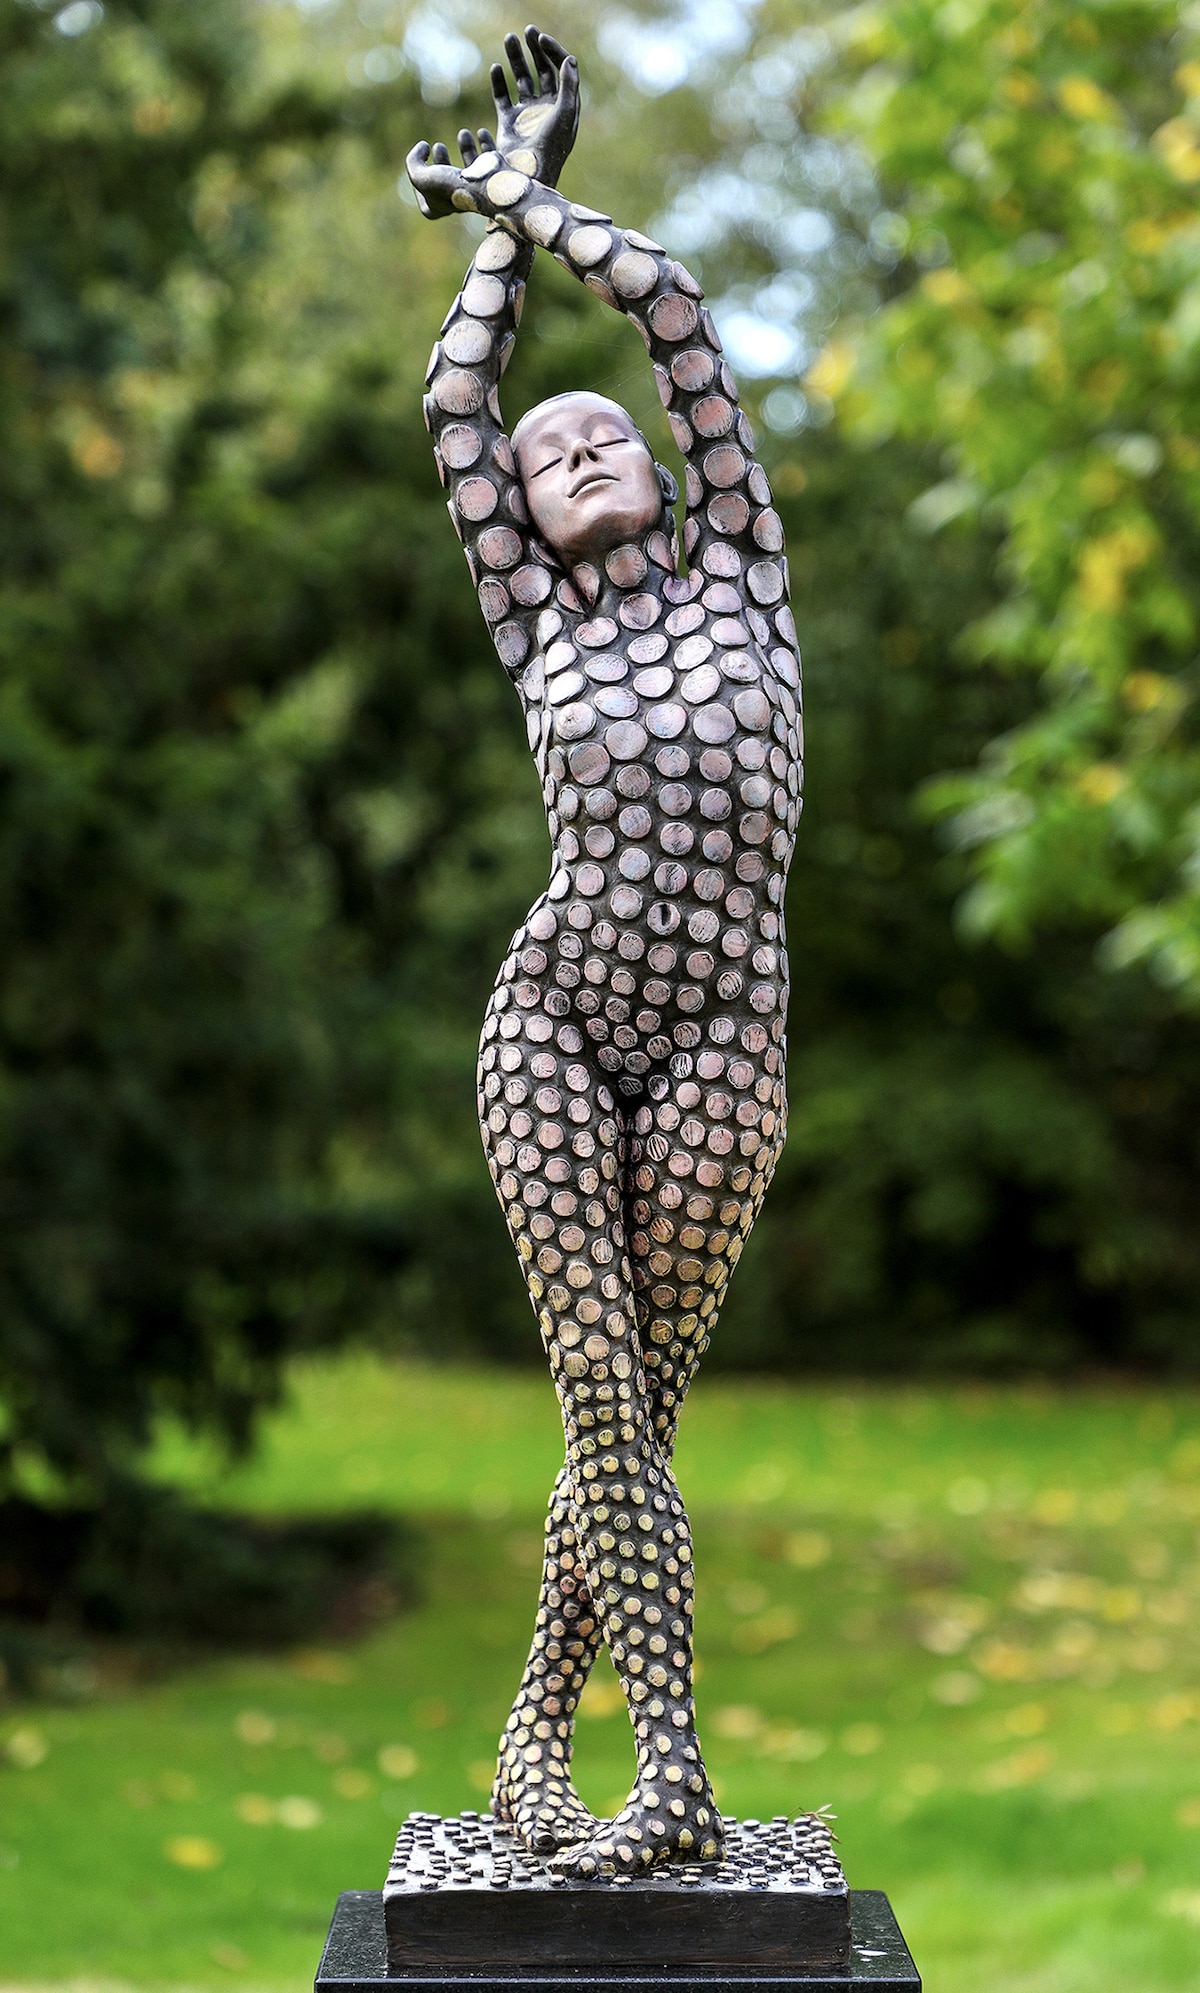 The Beauty Of Nature Fused With Elegant Human Movements In Lyrical Sculptures By Jonathan Hateley (13)